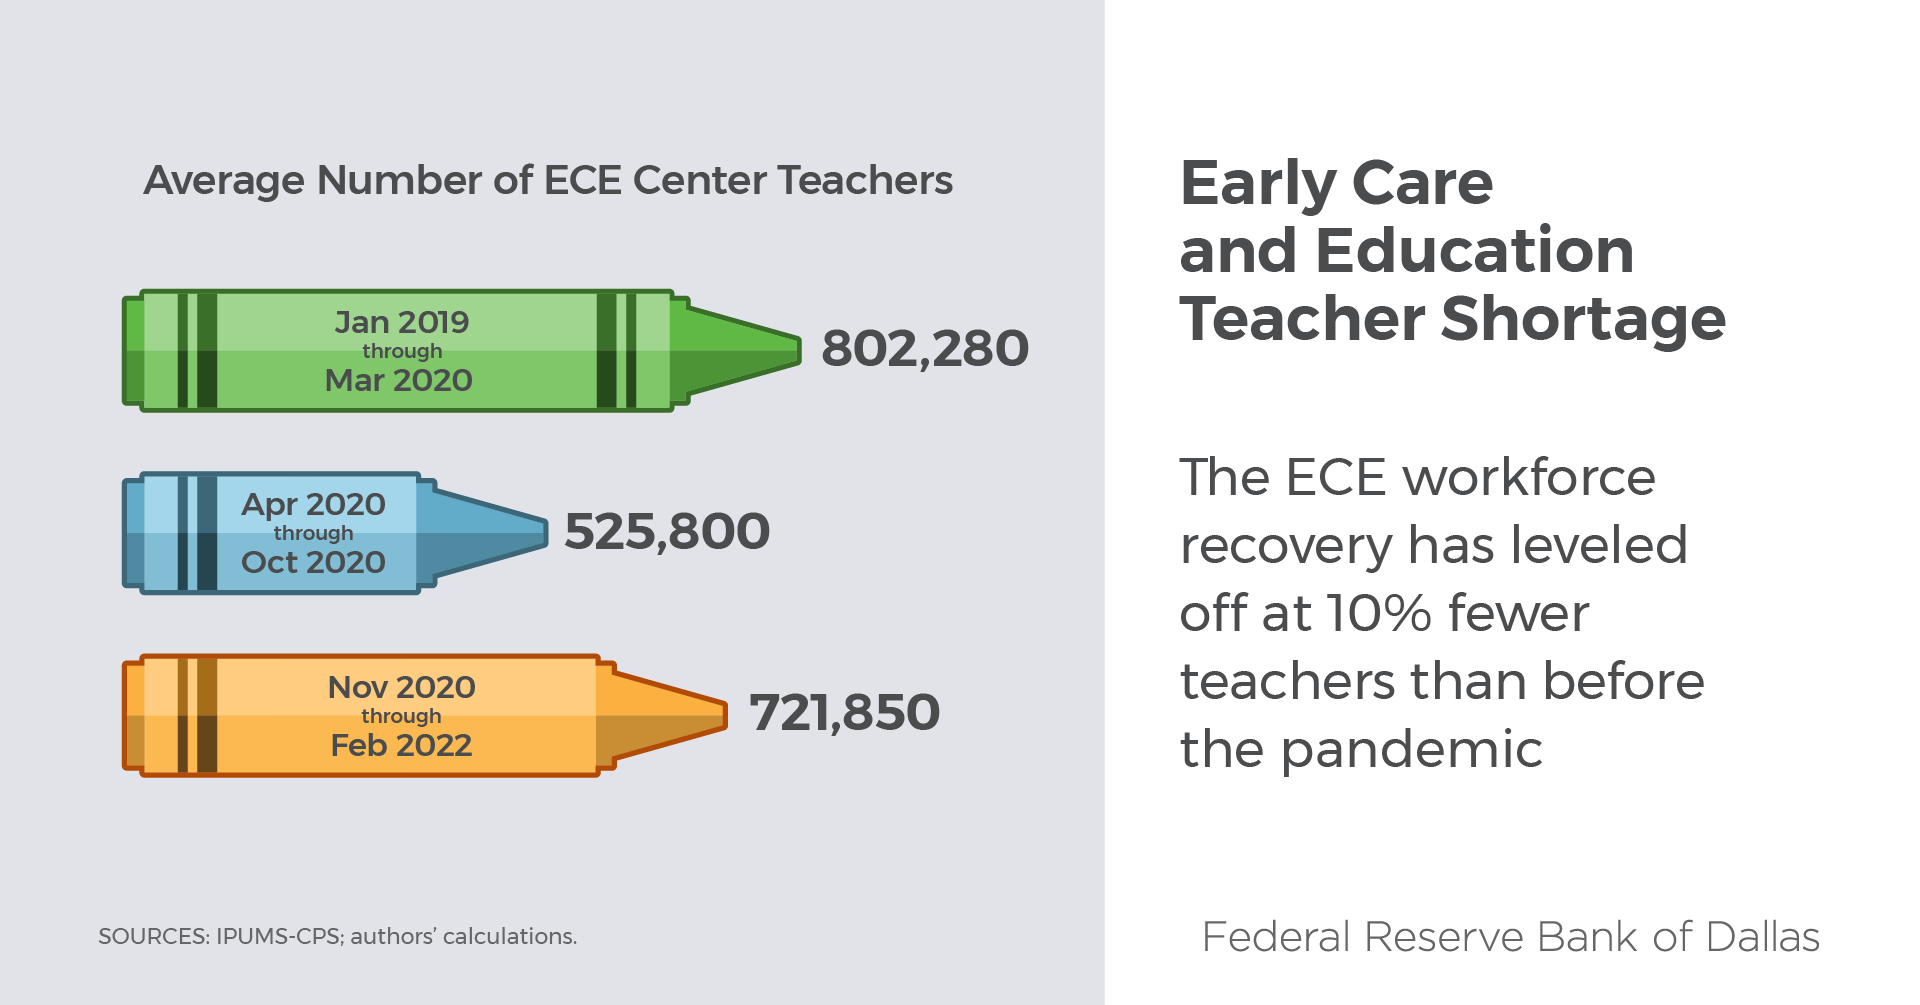 Early Care and Education Teacher Shortage